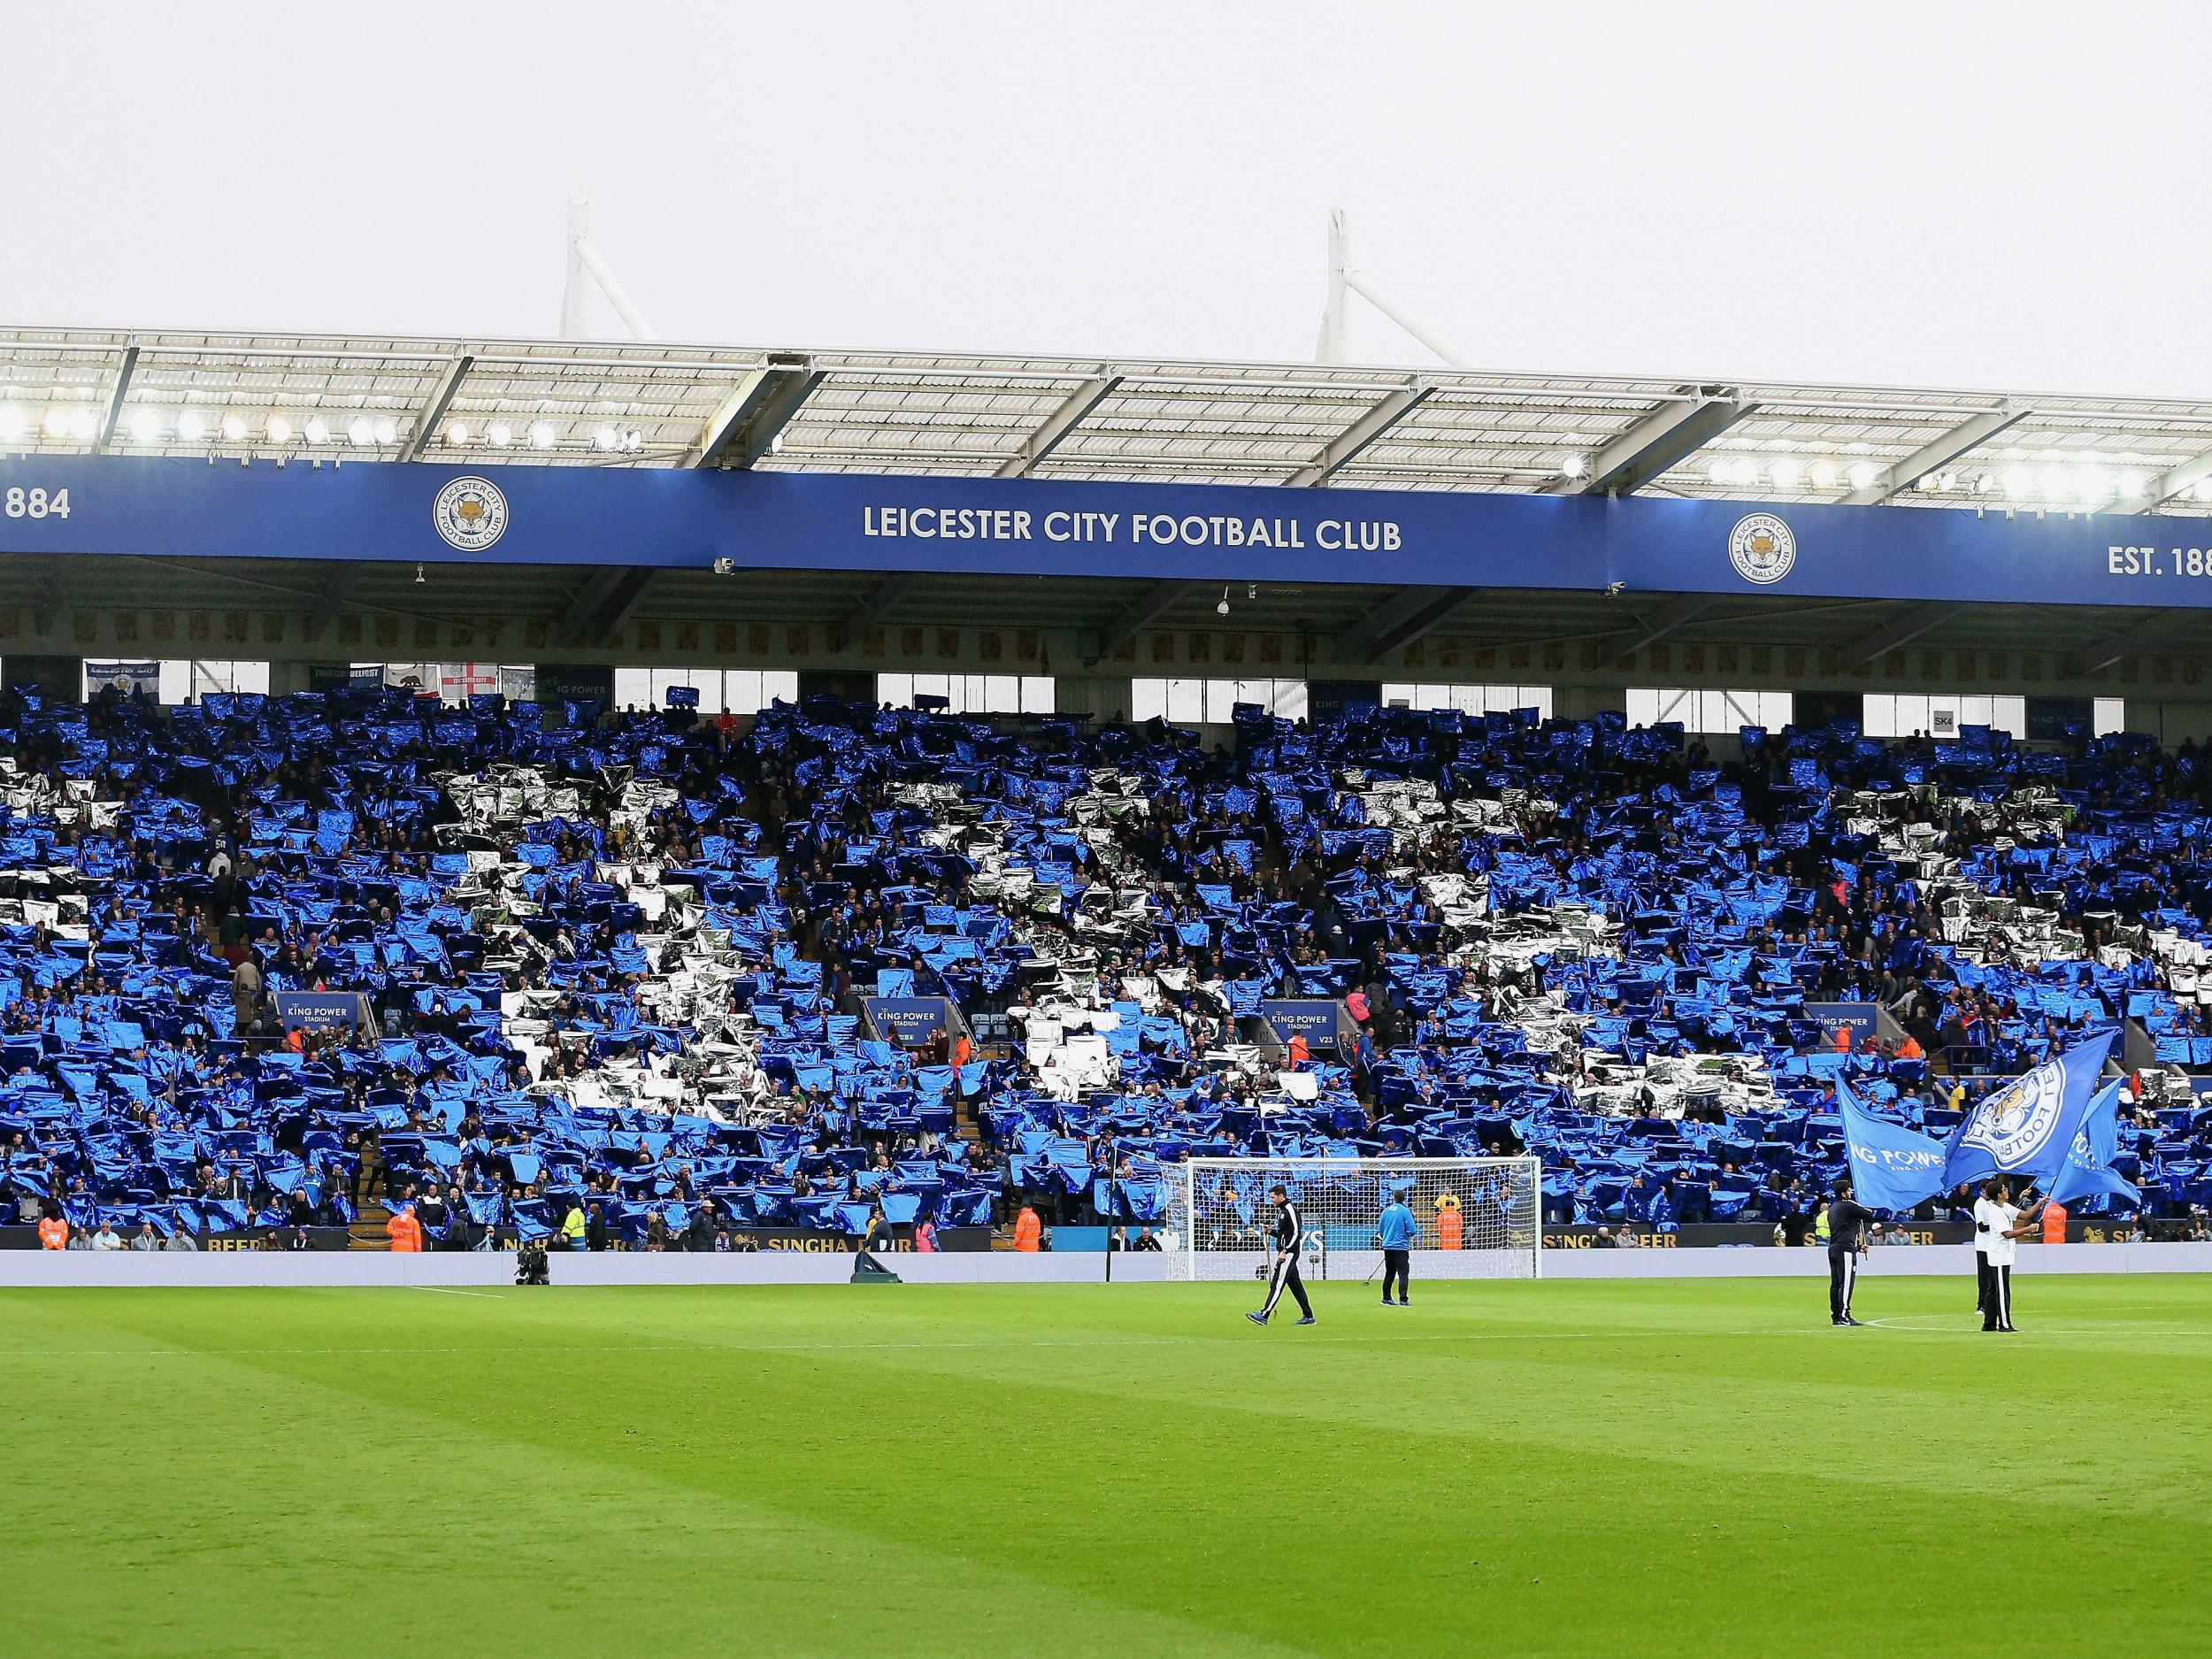 The King Power Stadium, home of Leicester City